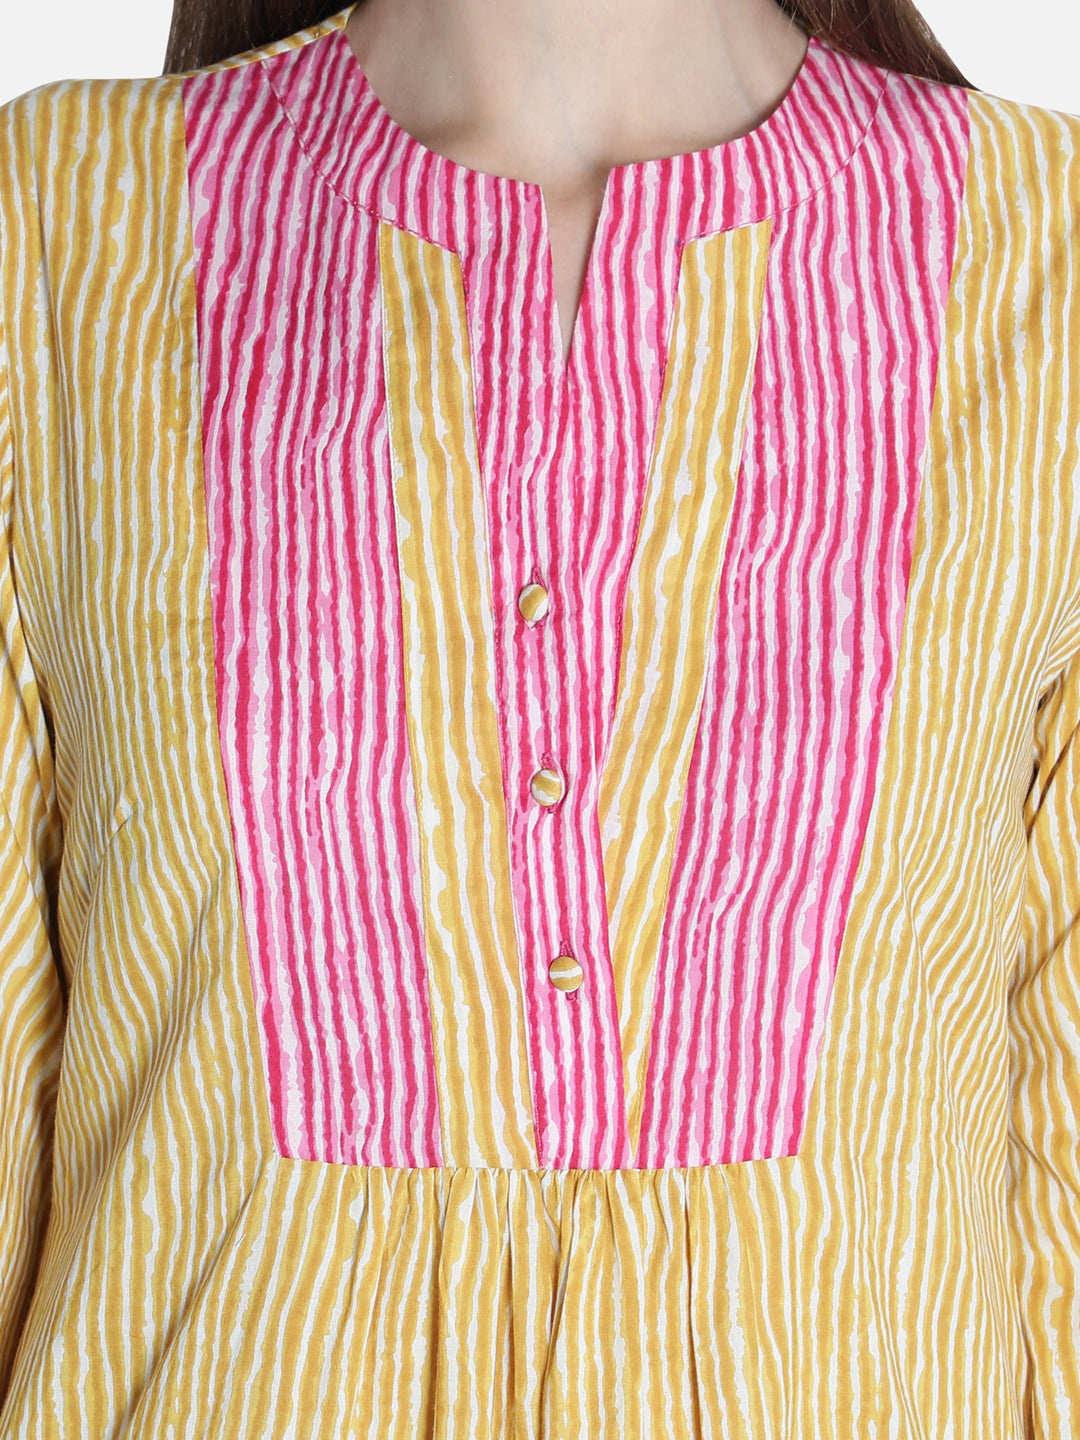 Women Mustard And Off White Printed Dress